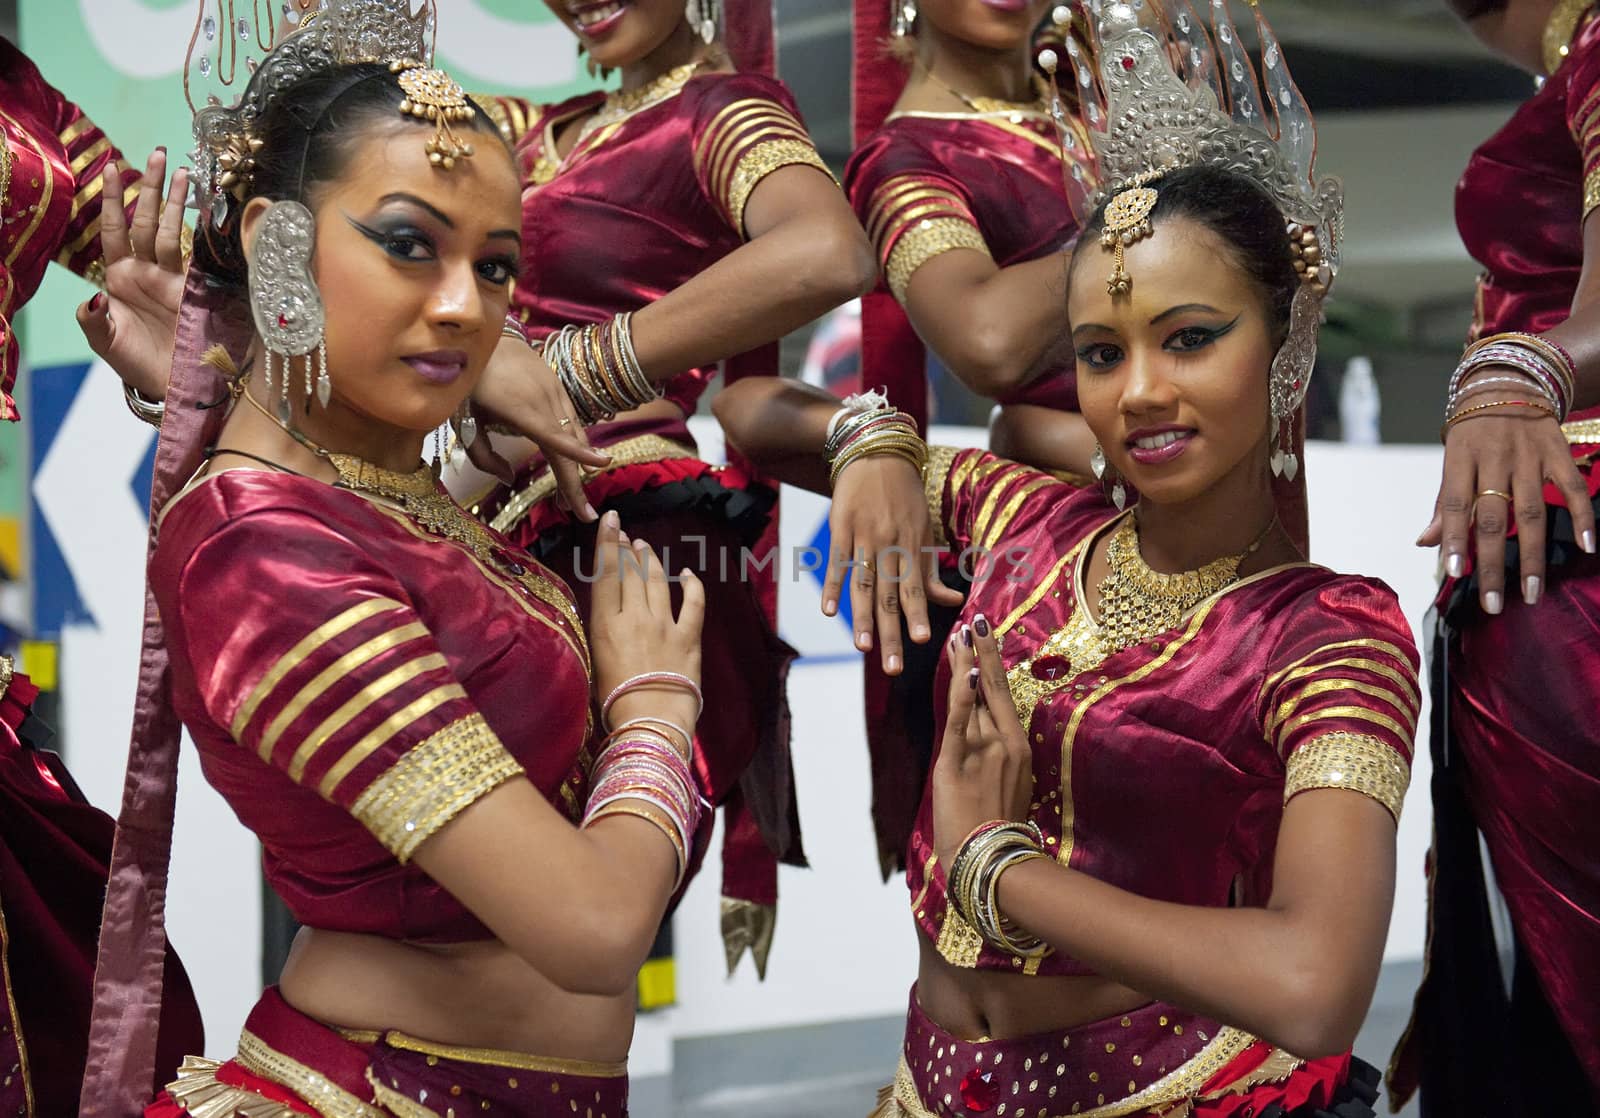 CHENGDU - MAY 29:Sri Lankan girls perform traditional dance in the 3rd International Festival of the Intangible Cultural Heritage.May 29, 20011 in Chengdu, China.